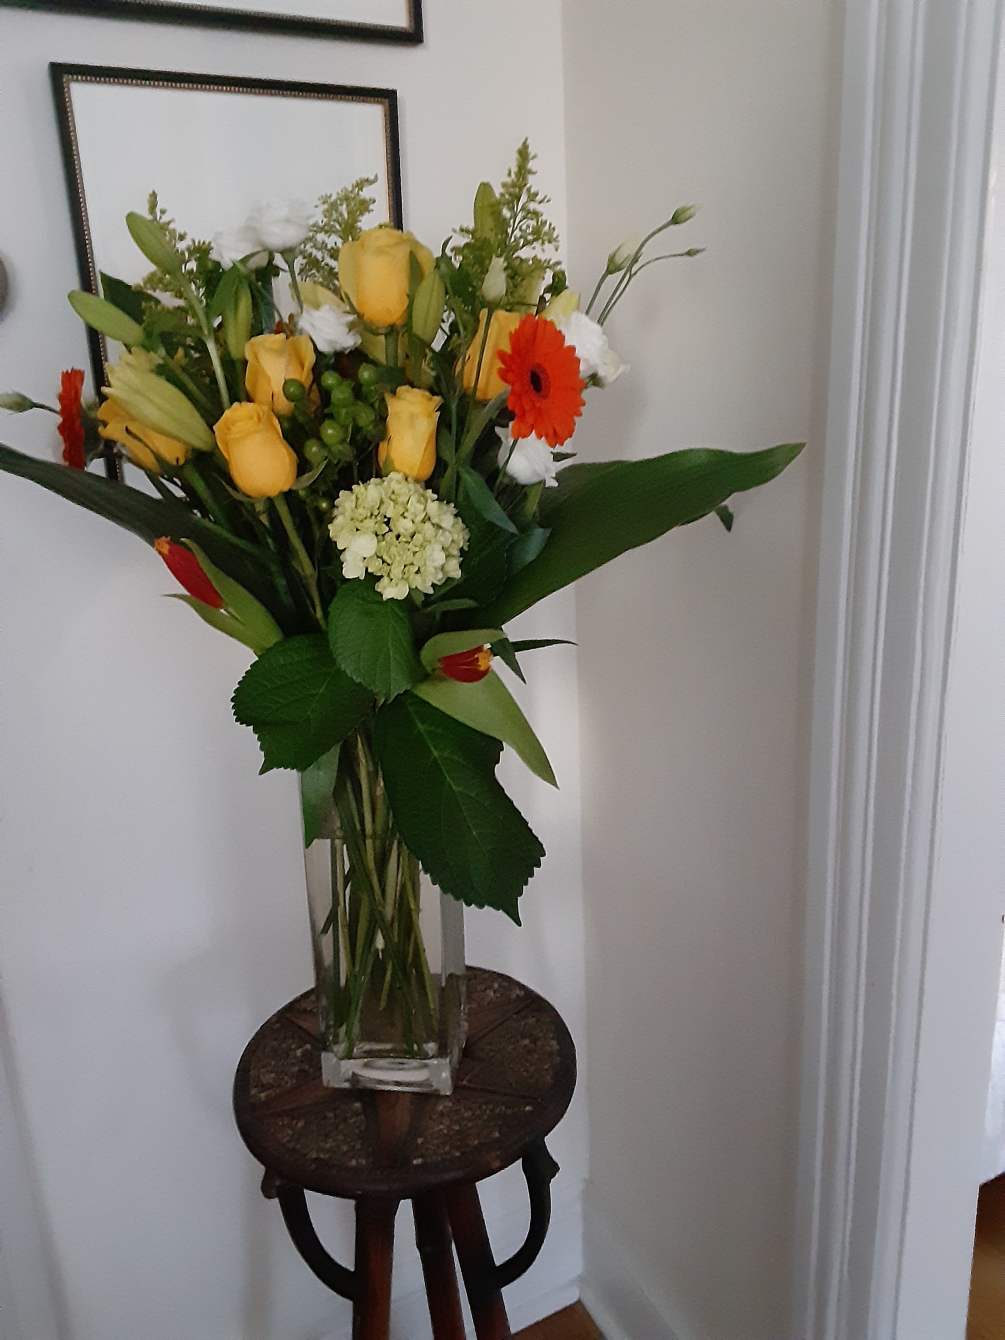 includes beautiful yellow roses